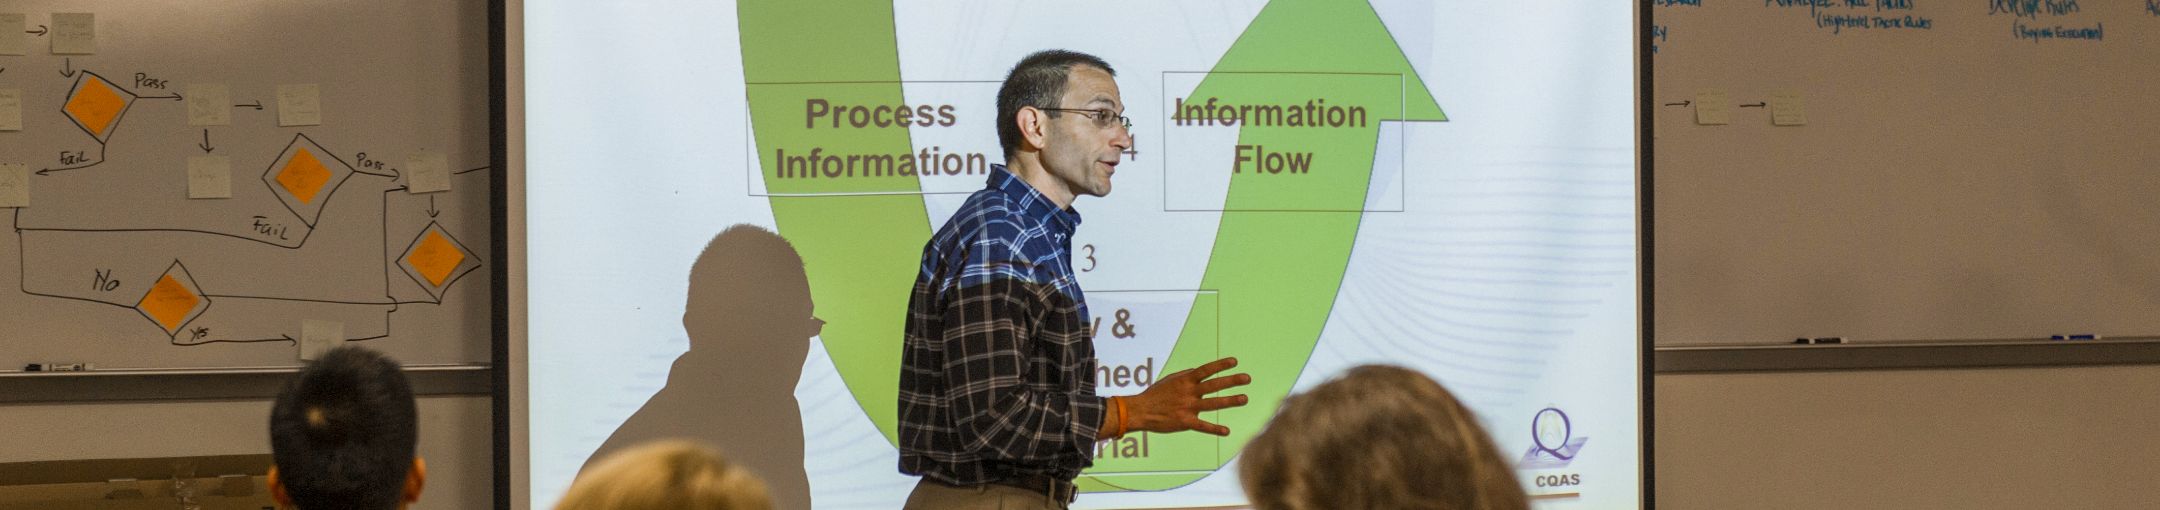 a professor lecturing in front of a projected info graph